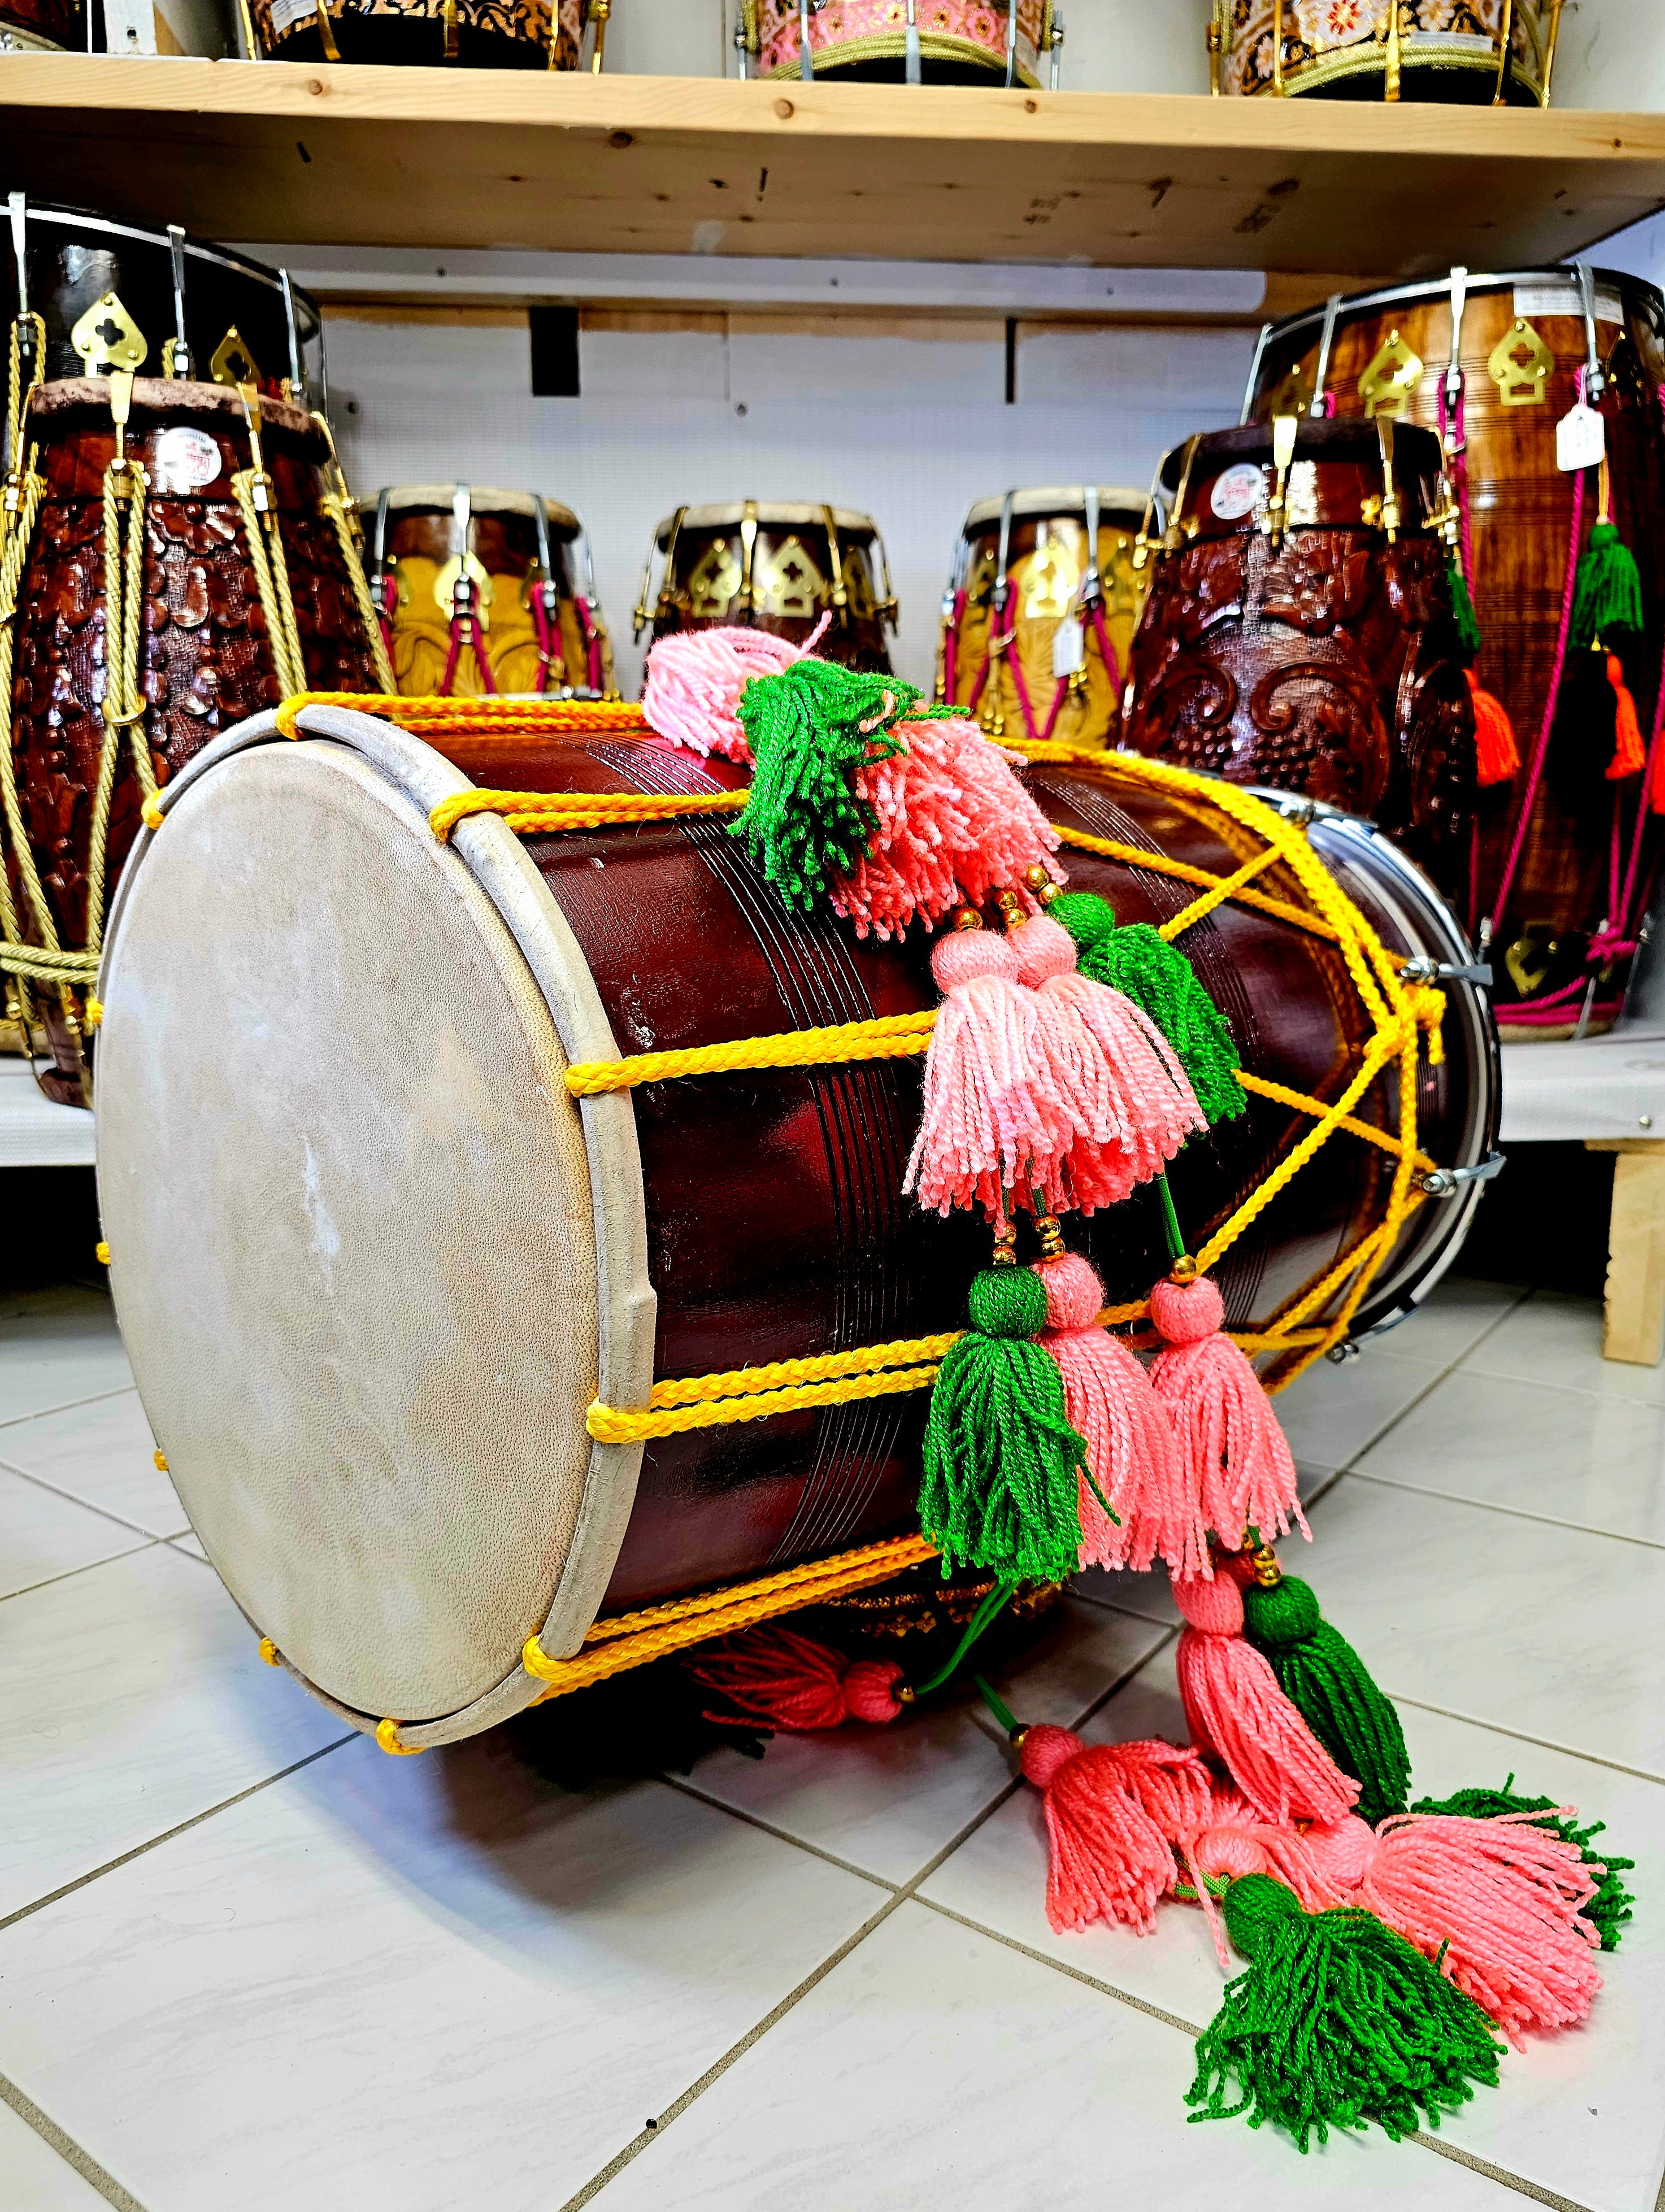 The Burgundy Fiesta Melody Dhol - A Professional Mango Wood Dhol with Yellow Ropes, Chrome Bolts, and Pink and Green Tassels!